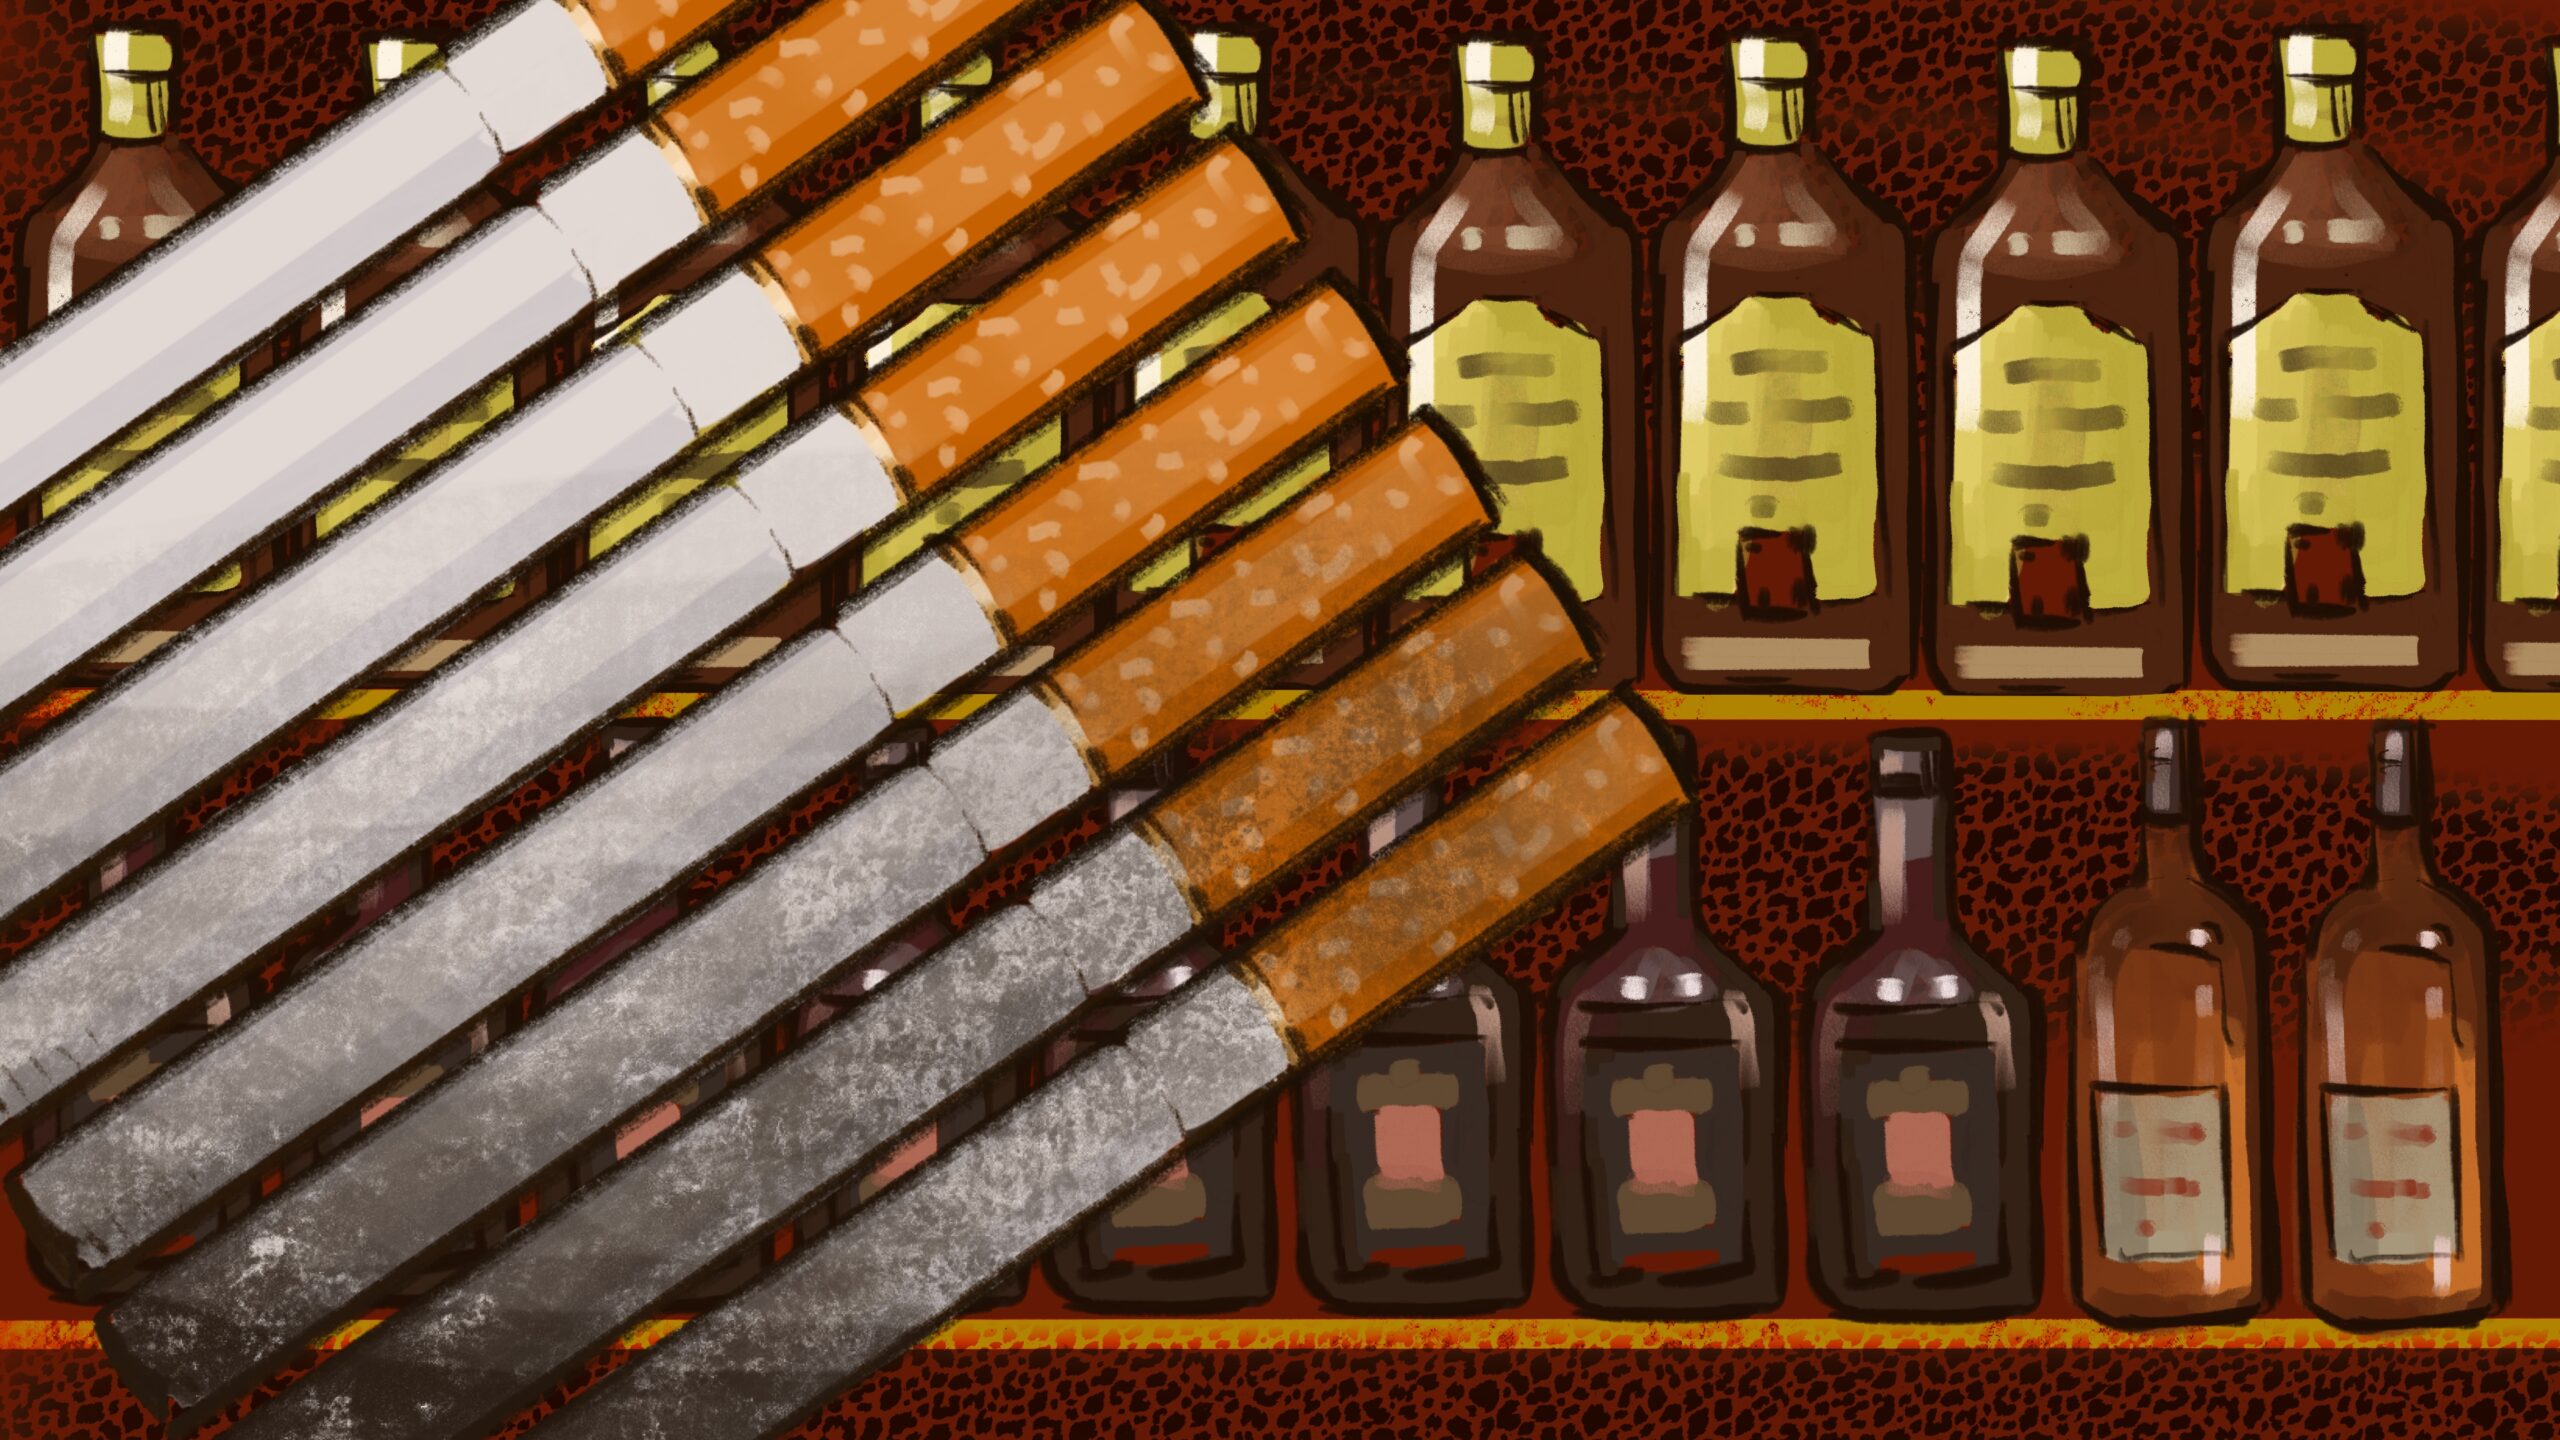 An illustrator's depiction of cigarettes and alcohol.